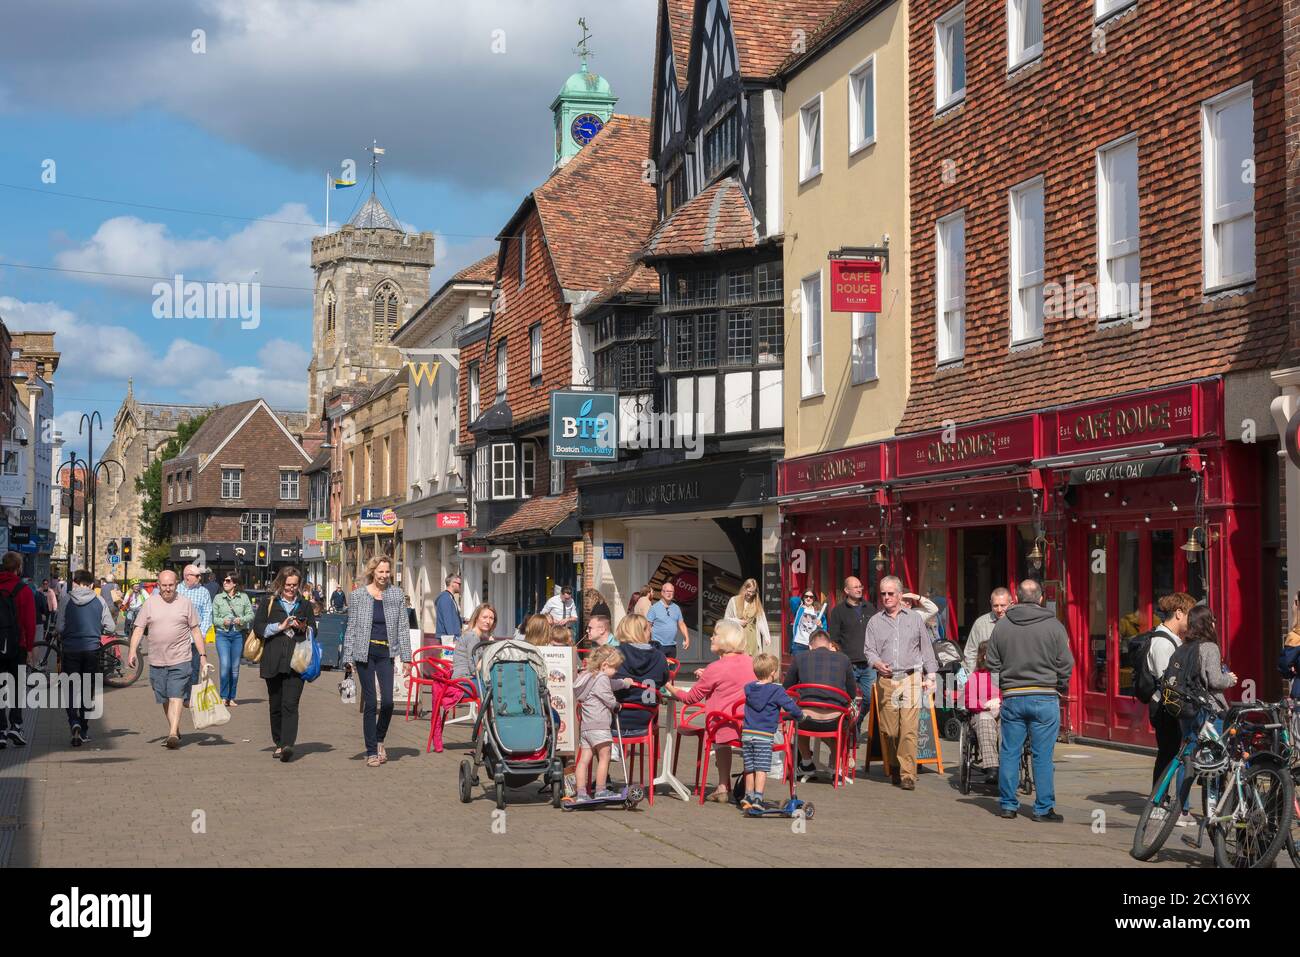 Salisbury city centre, view in summer of people walking in the High Street - the main shopping thoroughfare in Salisbury, Wiltshire, England, UK Stock Photo